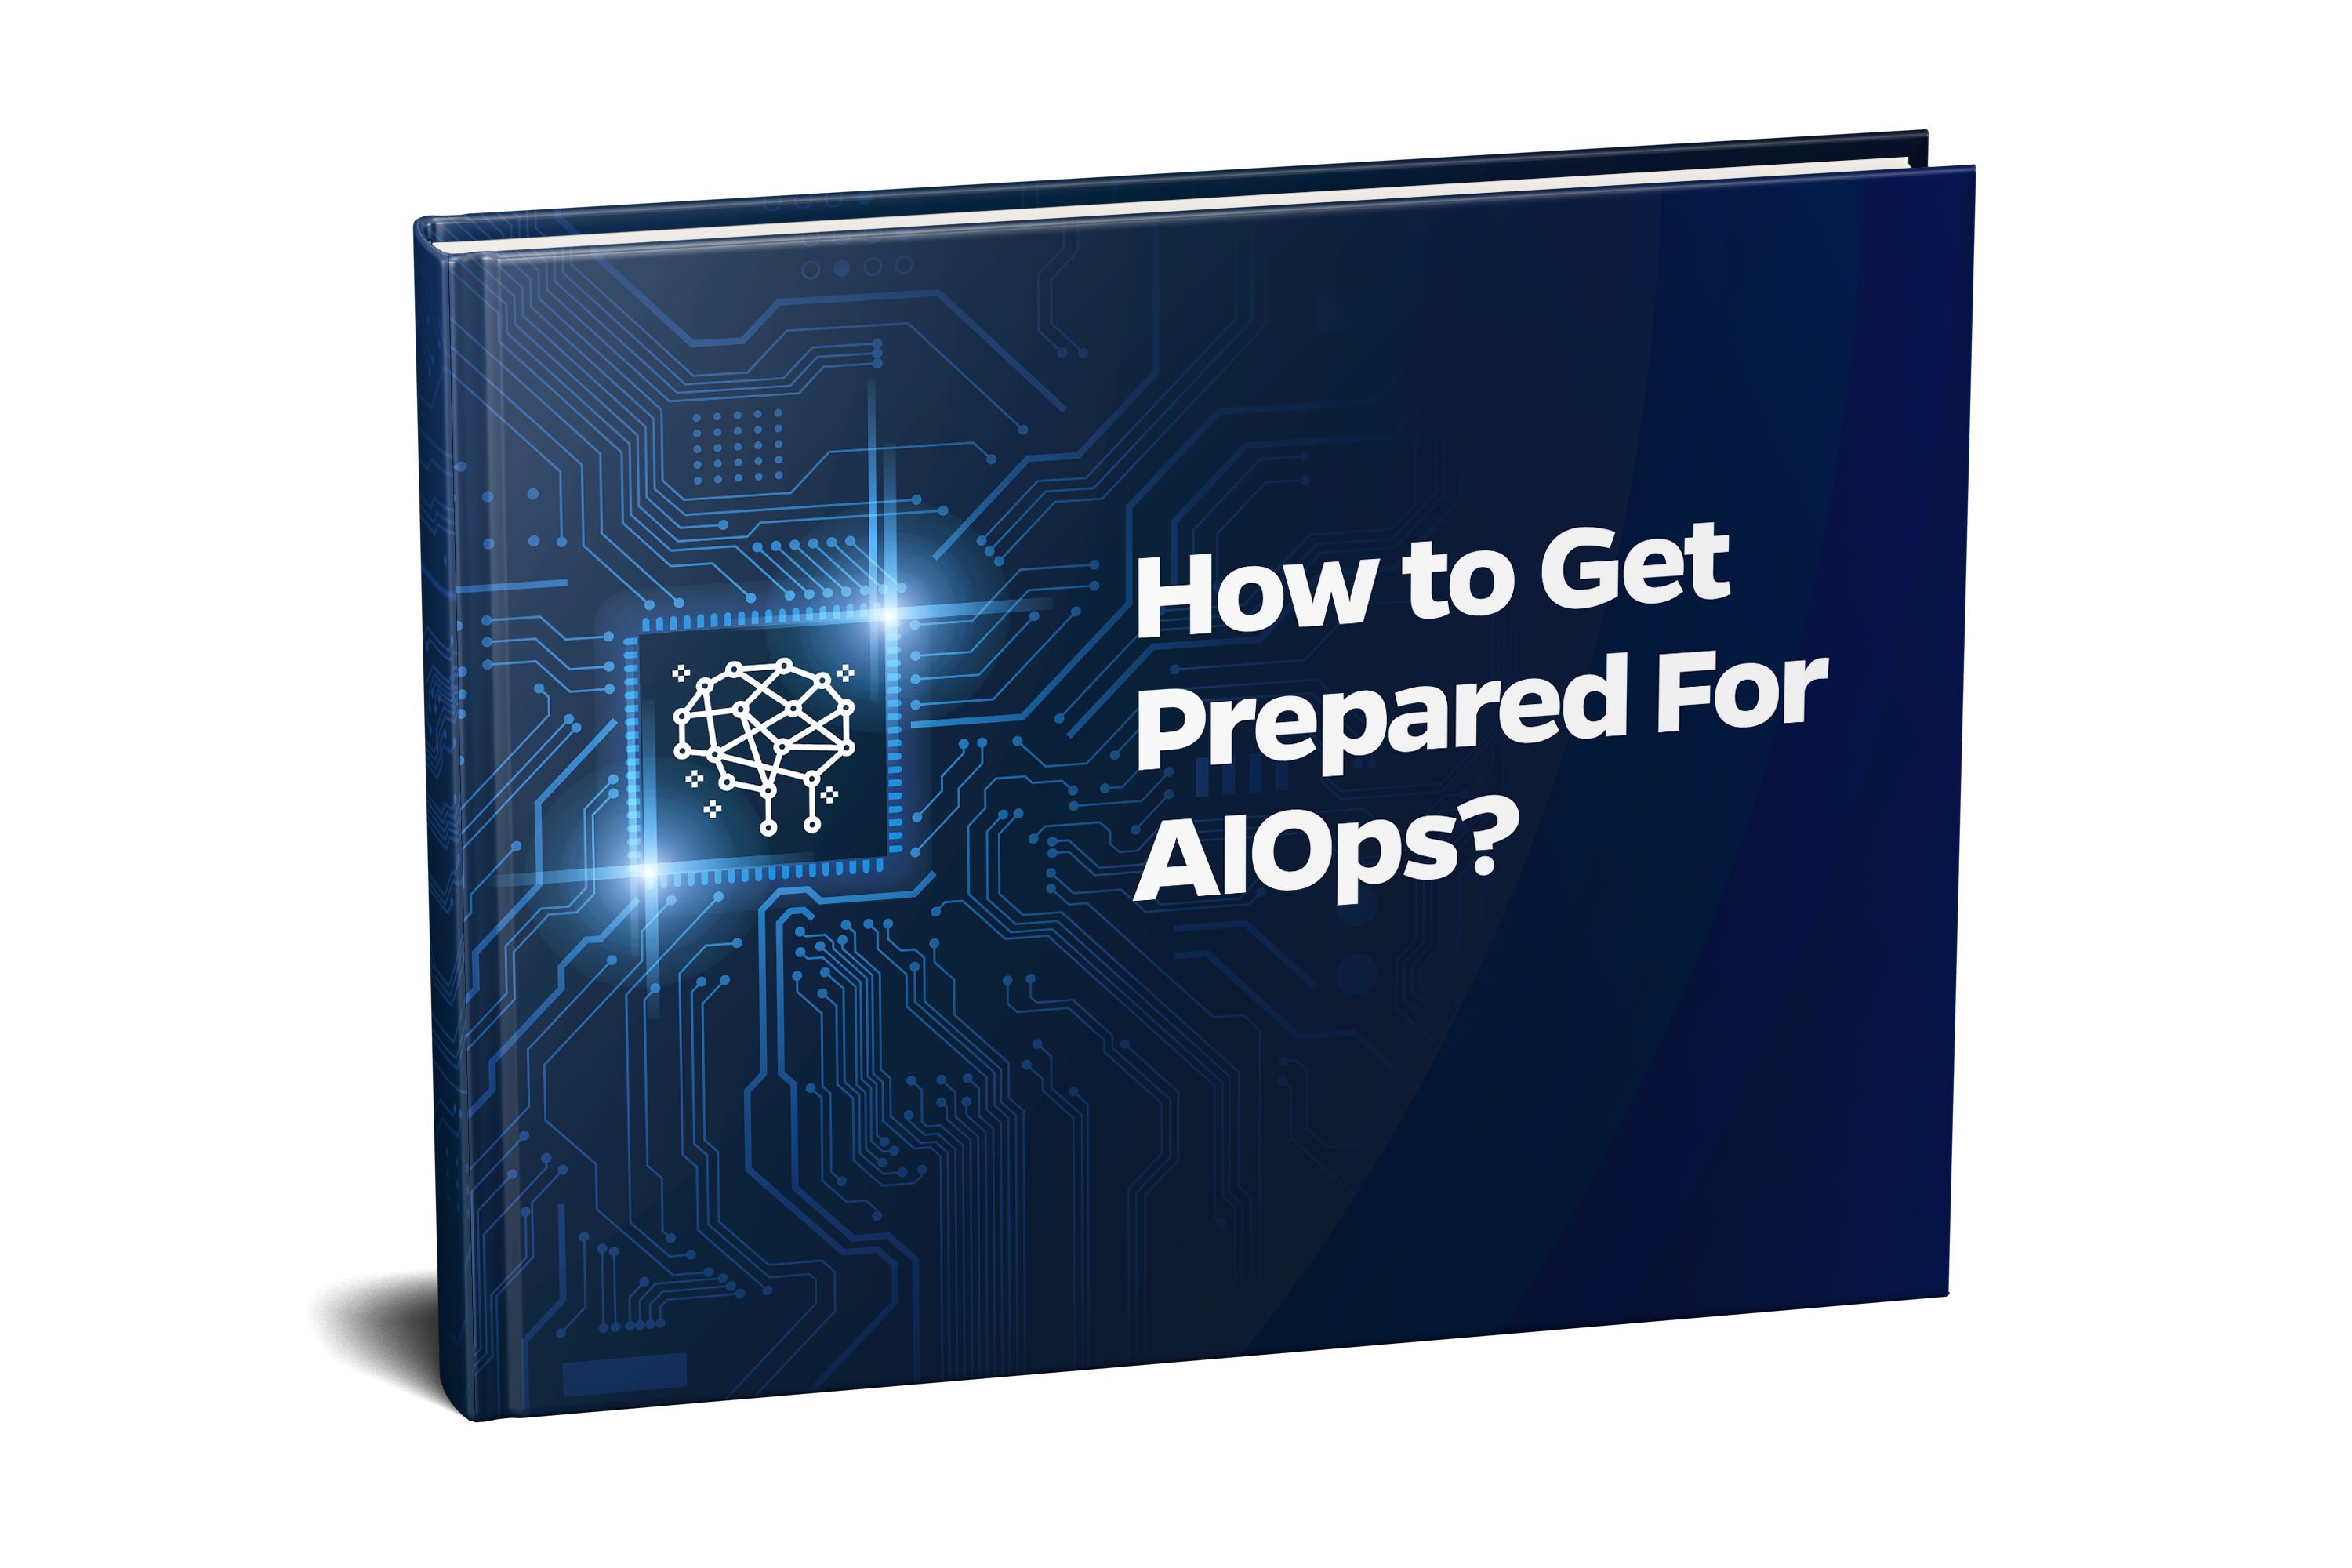 How to Get Prepared For AIOps